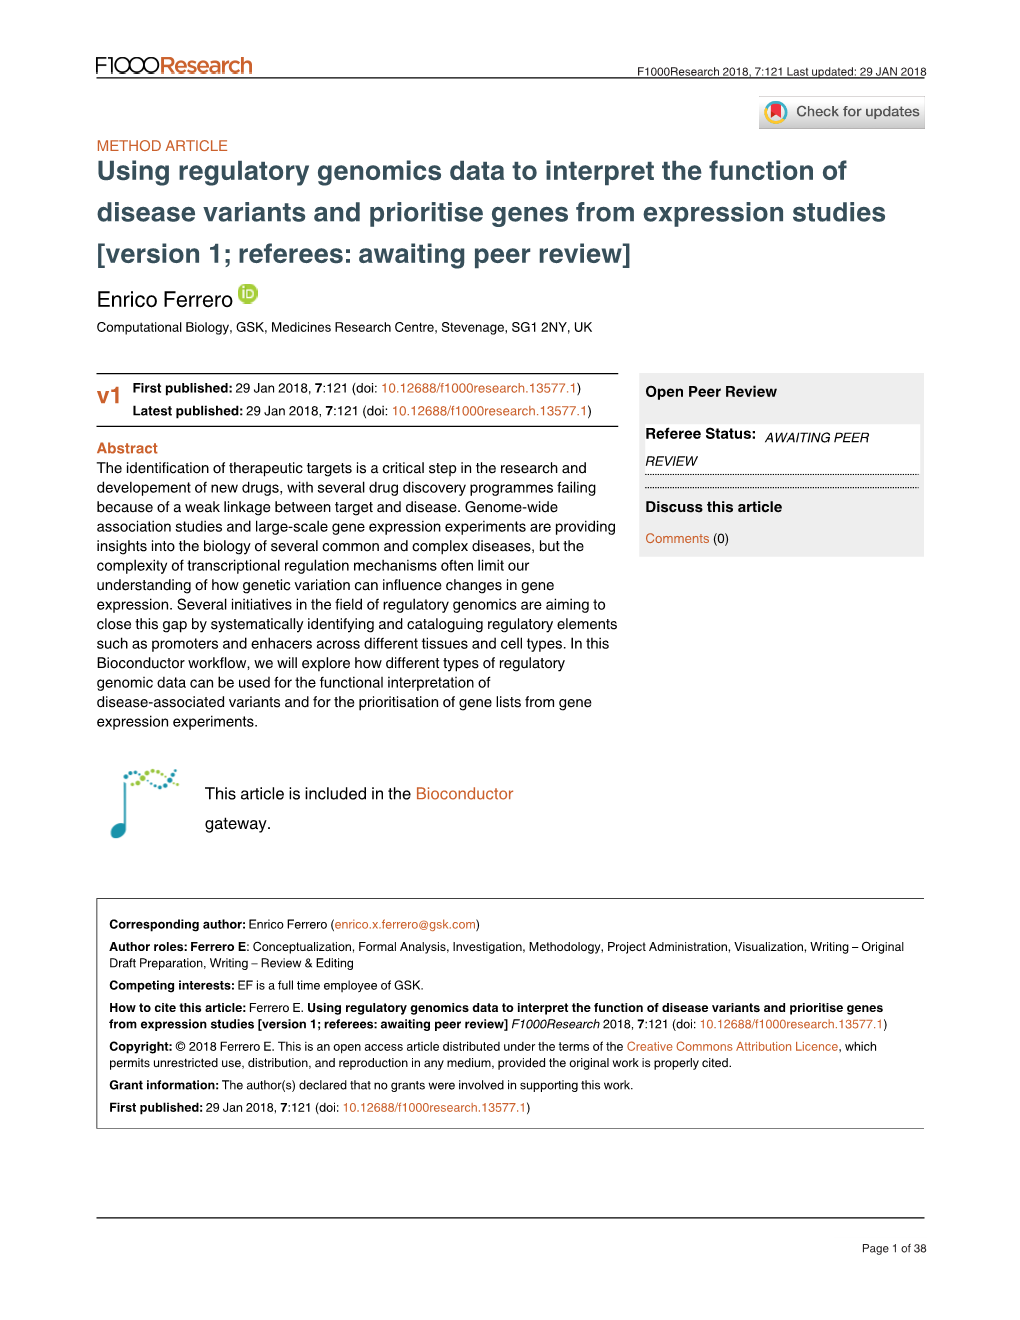 Using Regulatory Genomics Data to Interpret the Function of Disease Variants and Prioritise Genes from Expression Studies